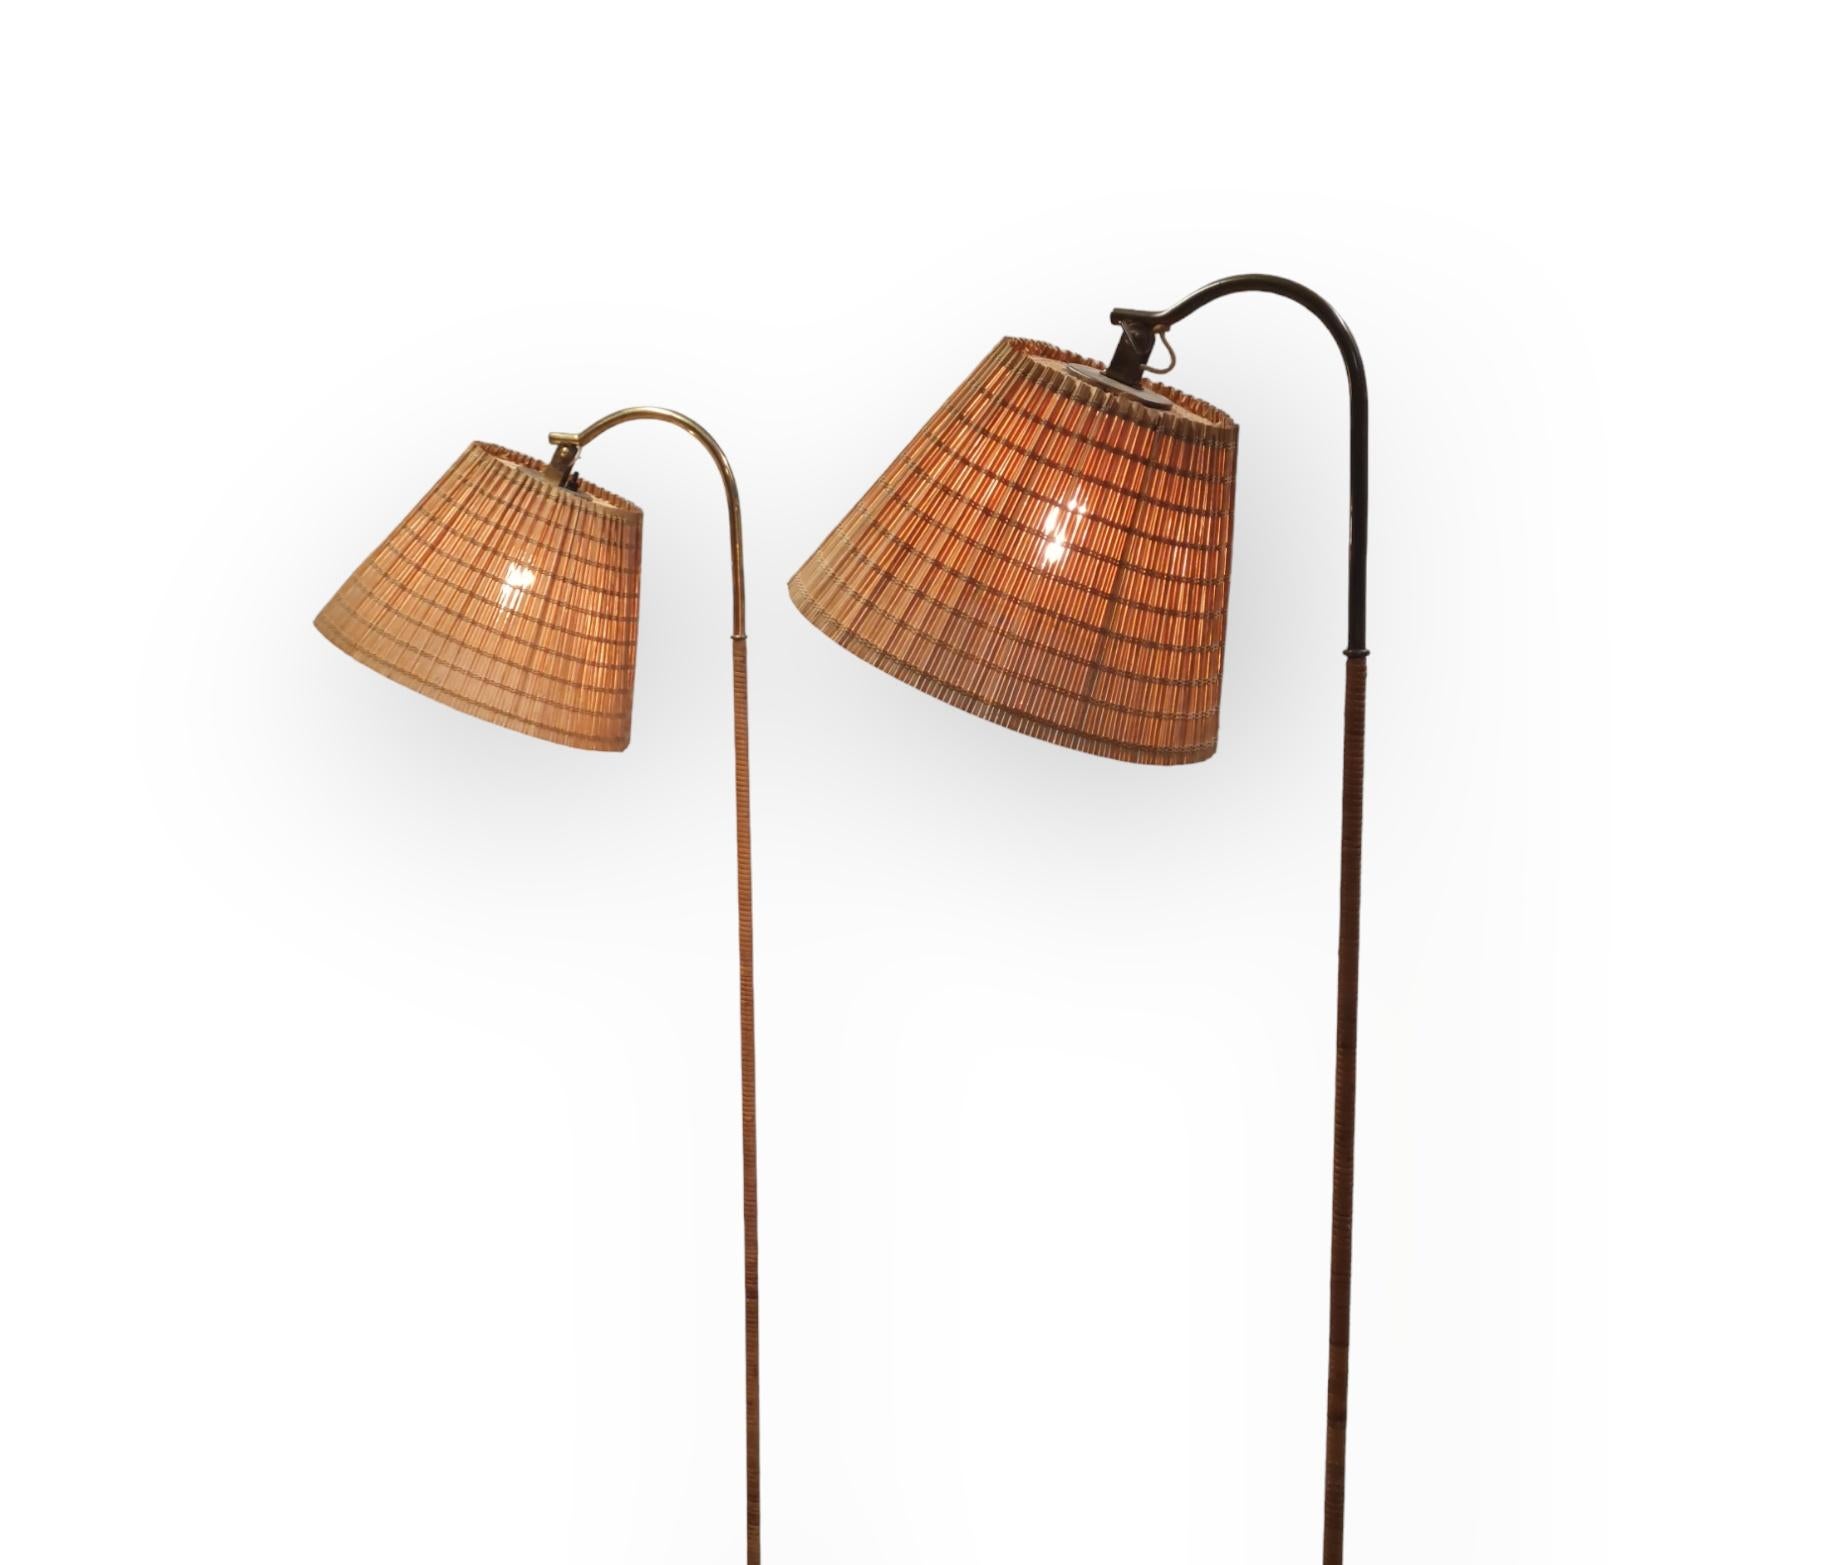 A Pair of Paavo Tynell Floor Lamps model. 9609, Taito Oy 4